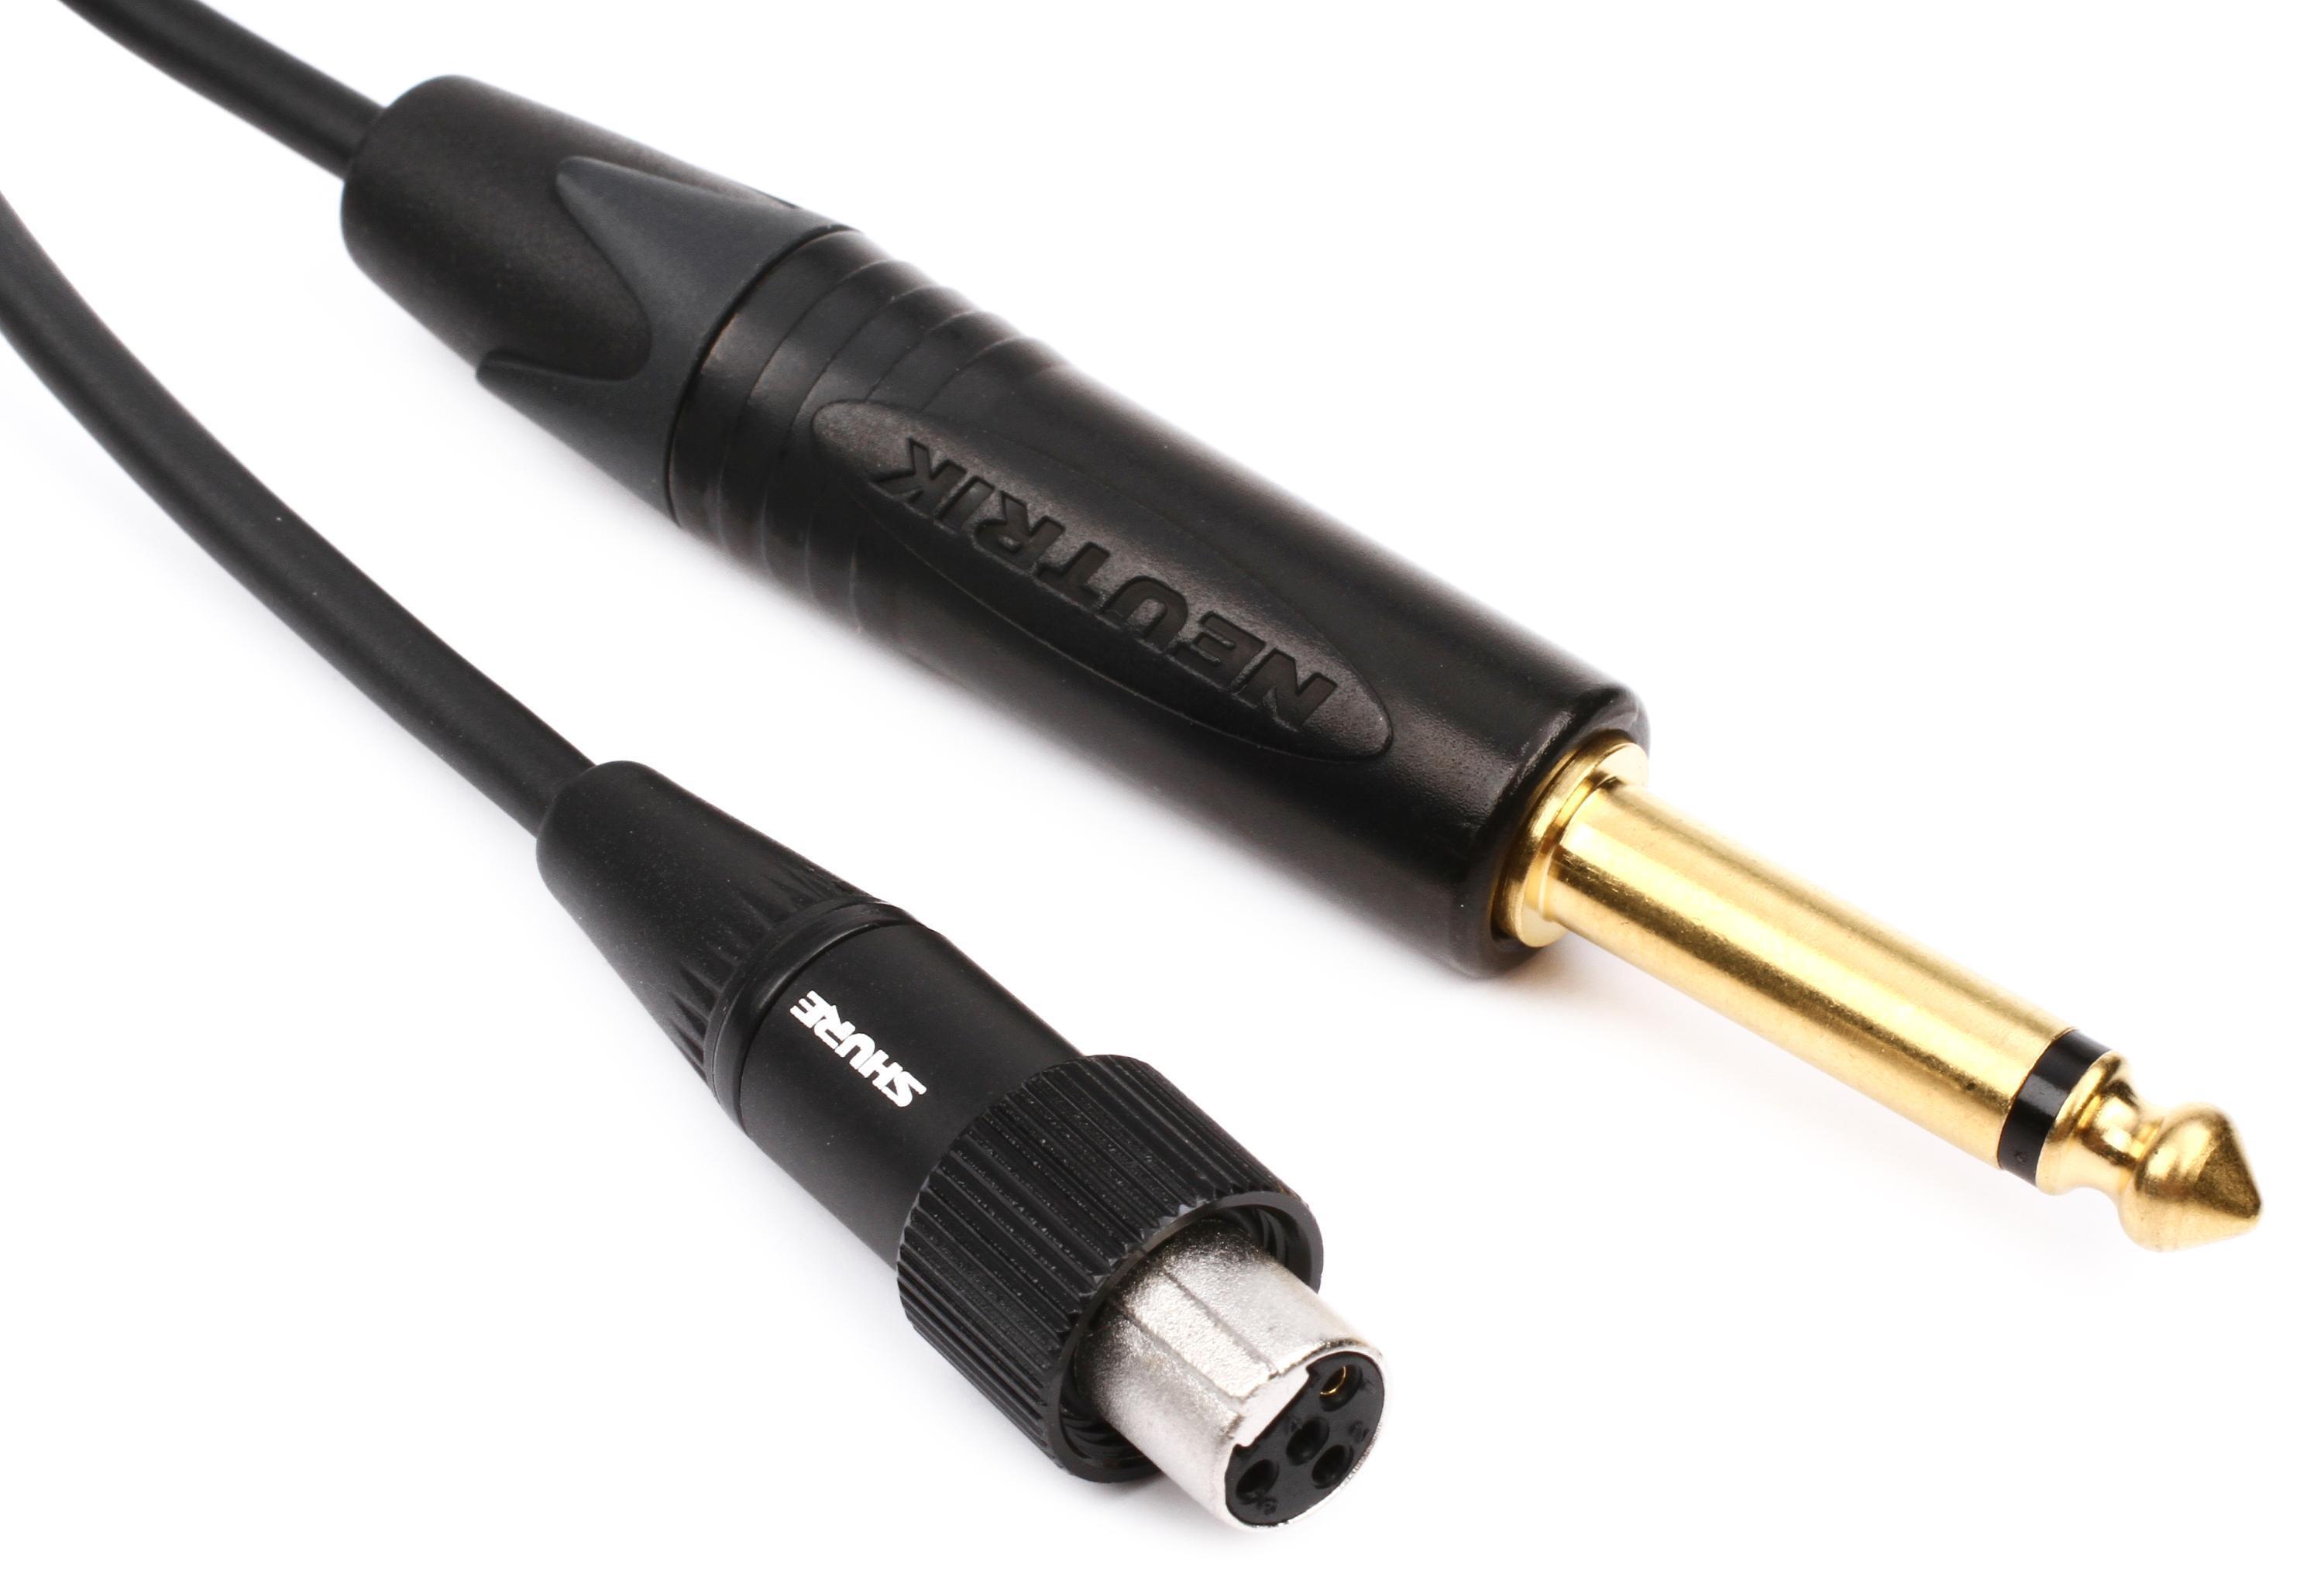 Bundled Item: Shure WA305 Premium 1/4-inch to TA4F Instrument Cable for Wireless Bodypack Transmitter